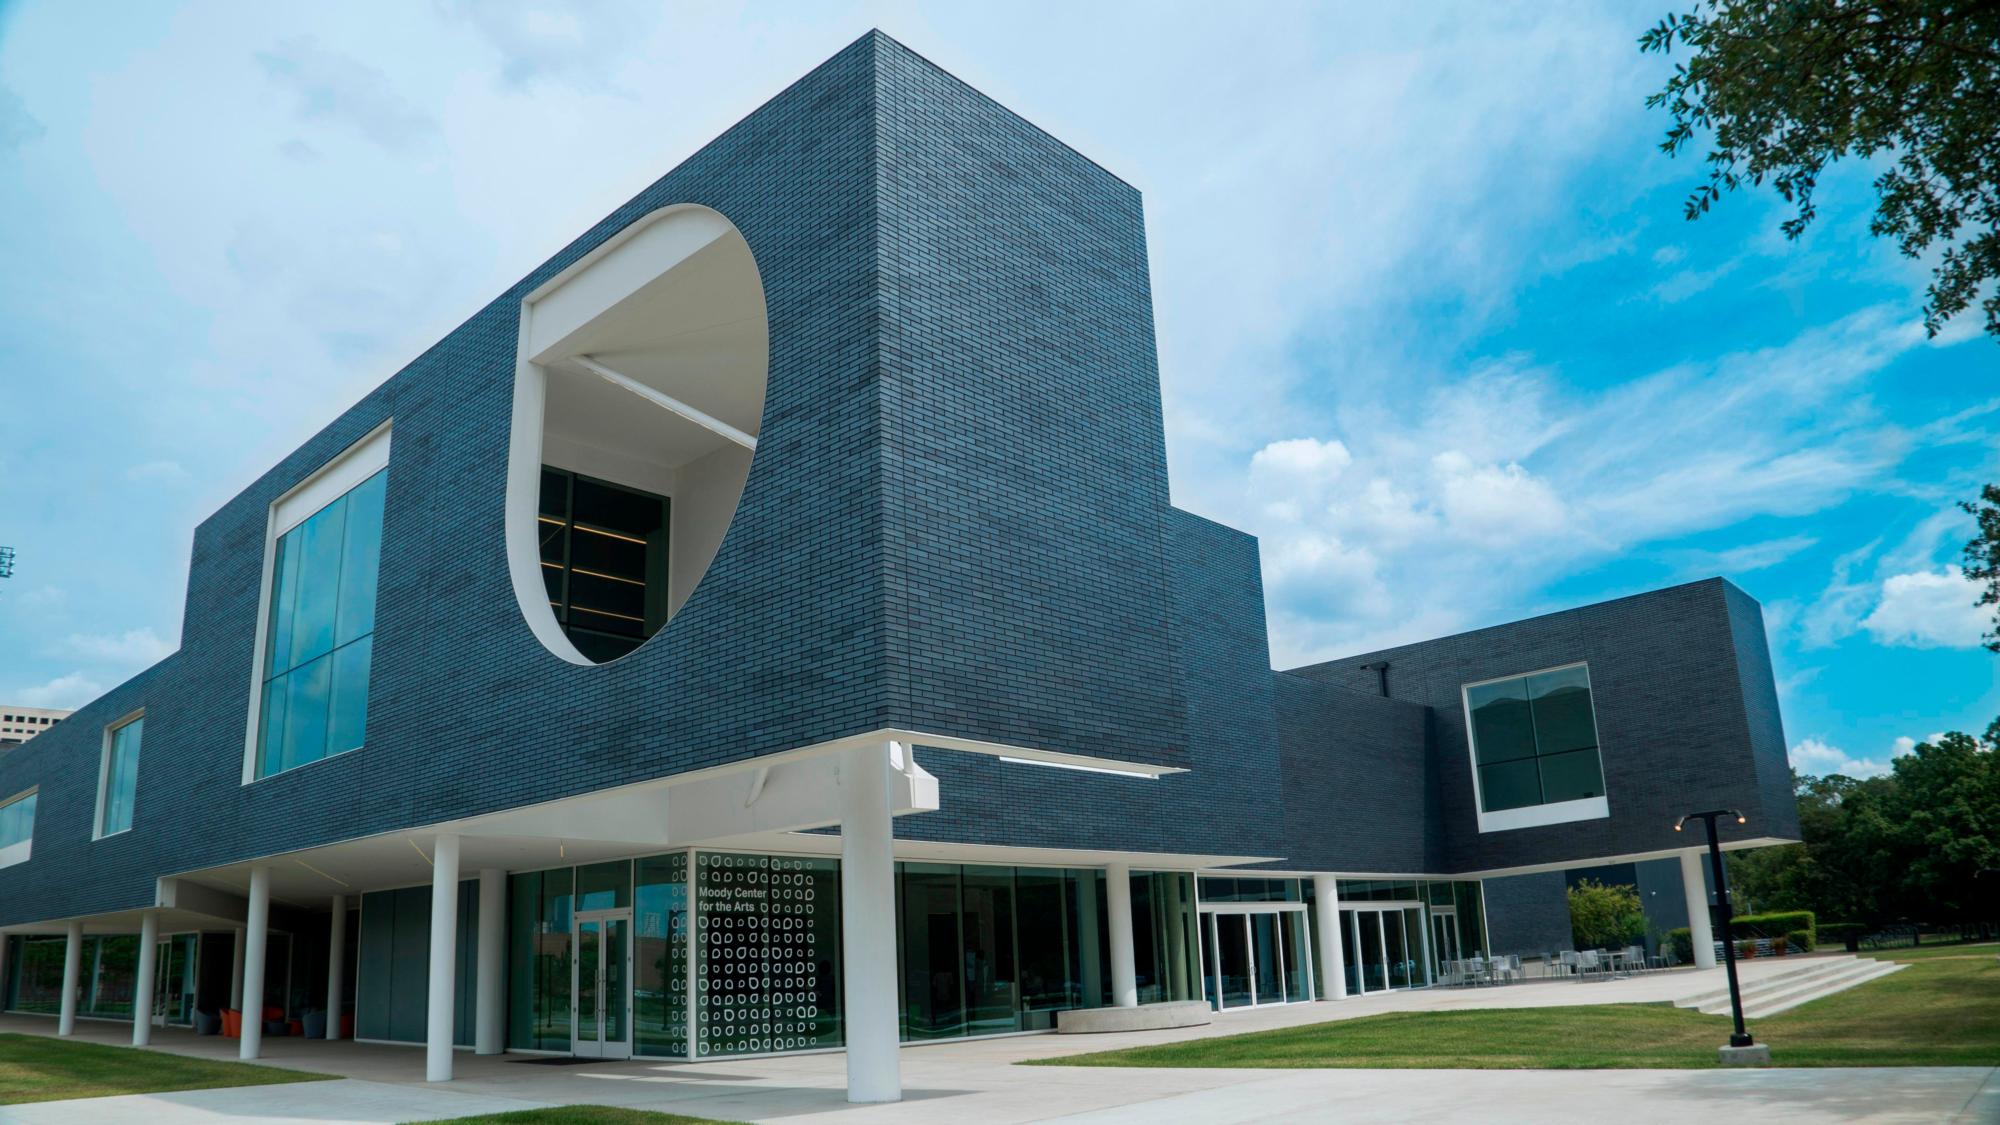 Image of the exterior of the darkly bricked and white columned Moody Center for the Arts - Rice University